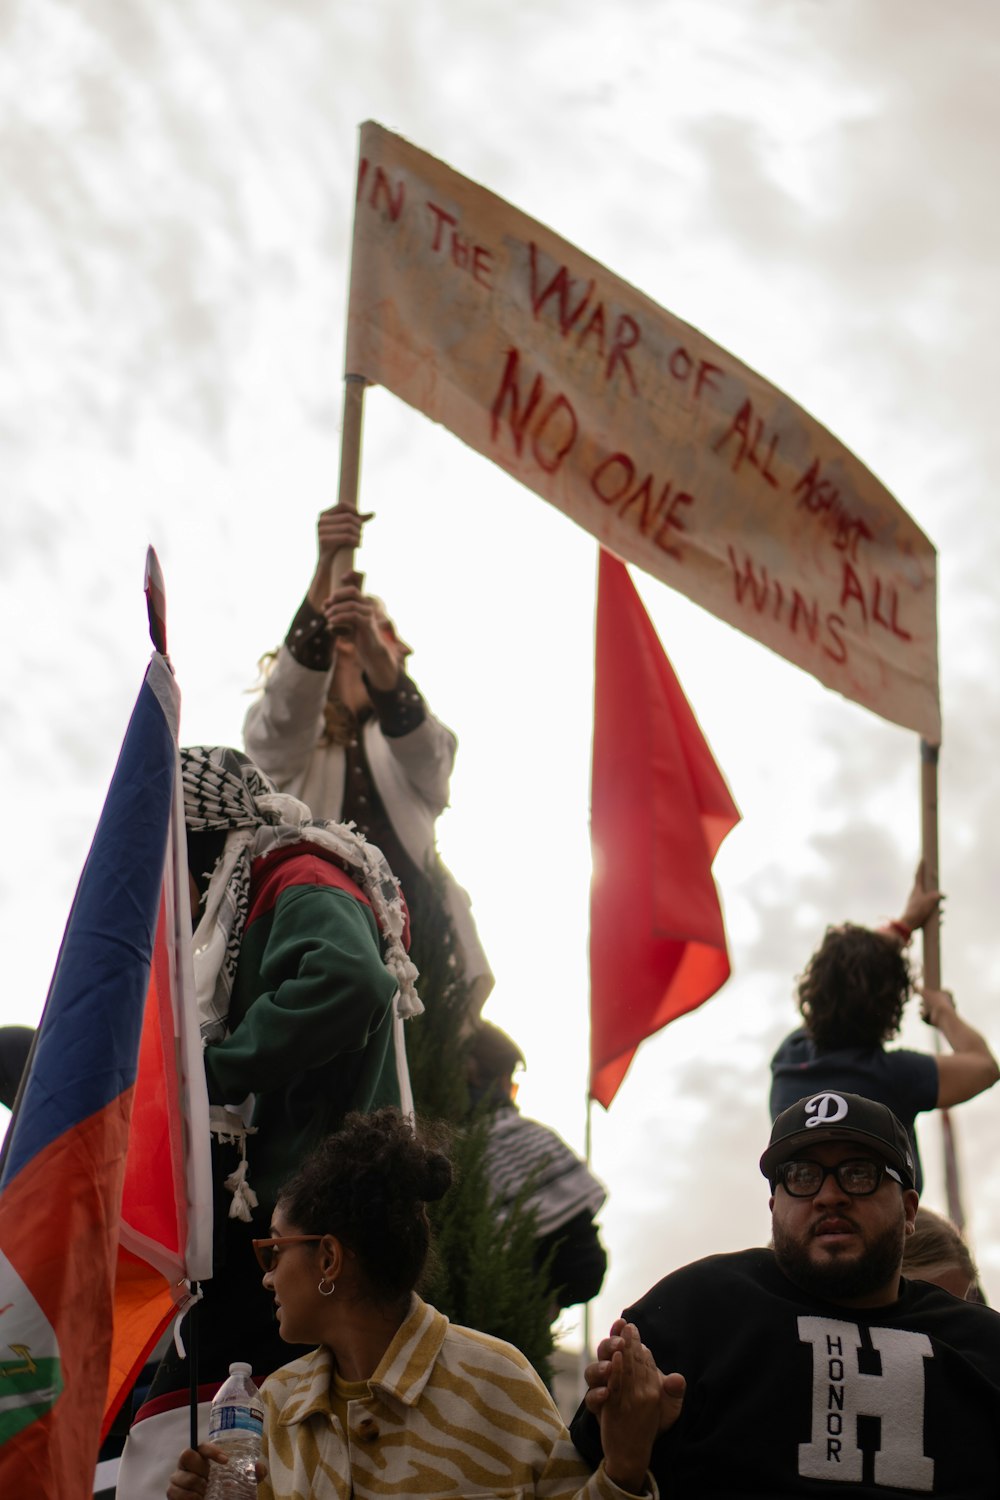 a group of people holding flags and signs